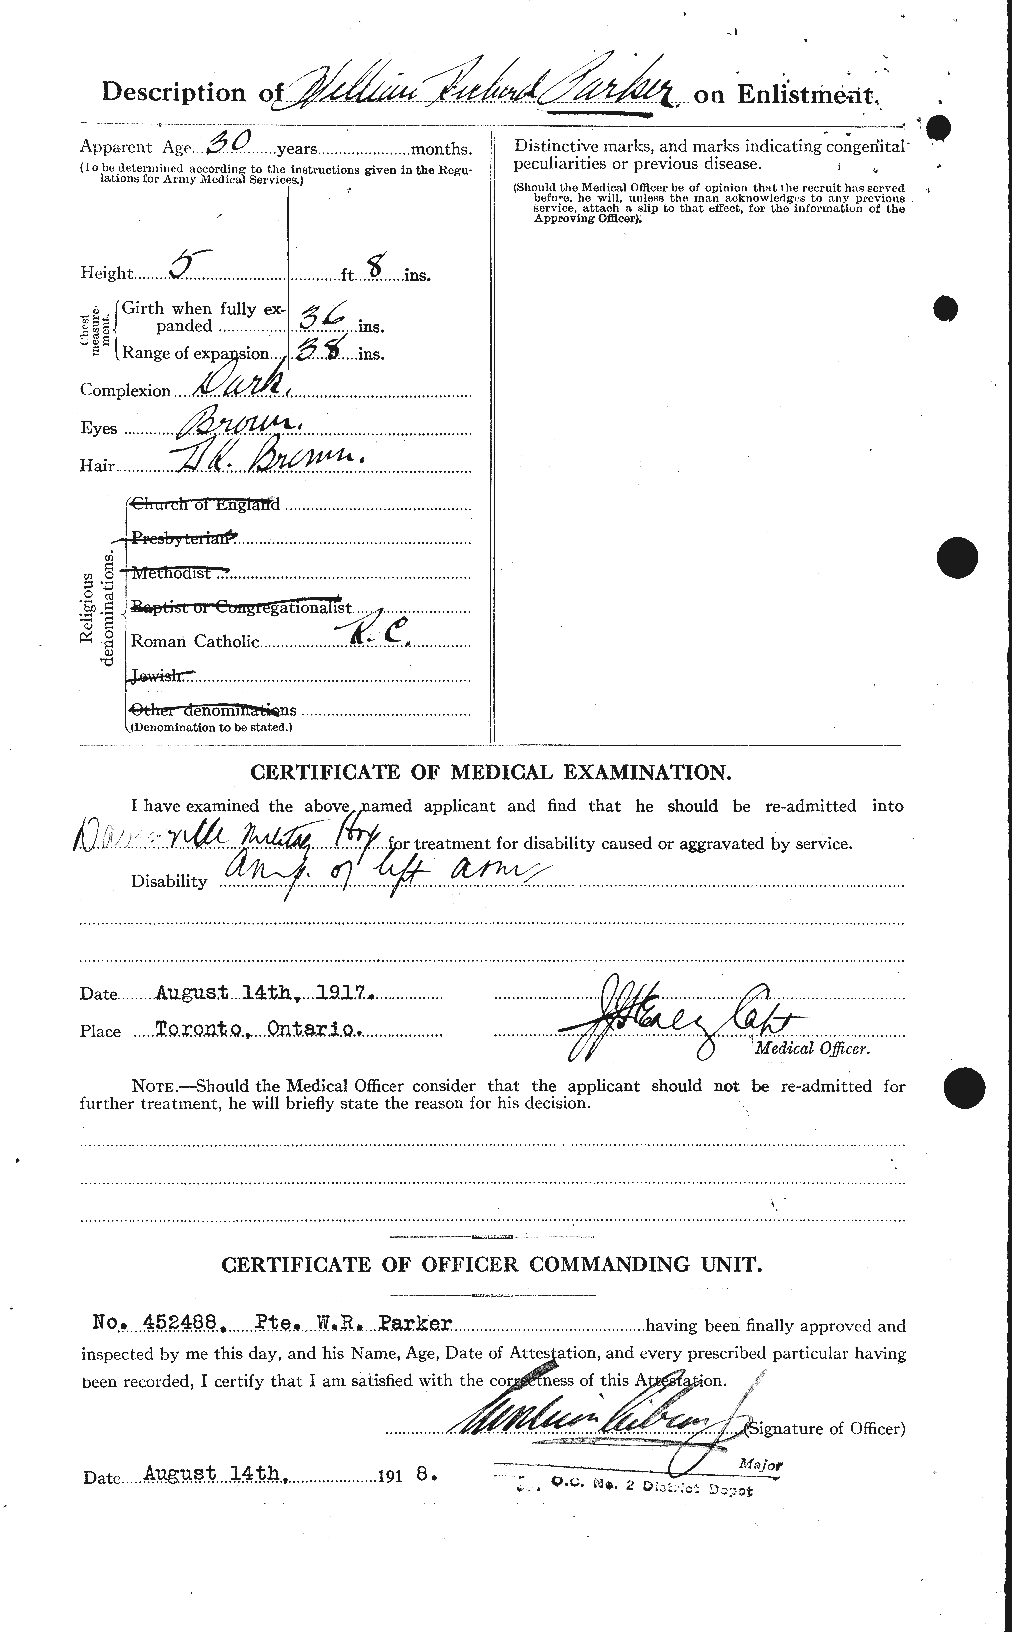 Personnel Records of the First World War - CEF 565781b